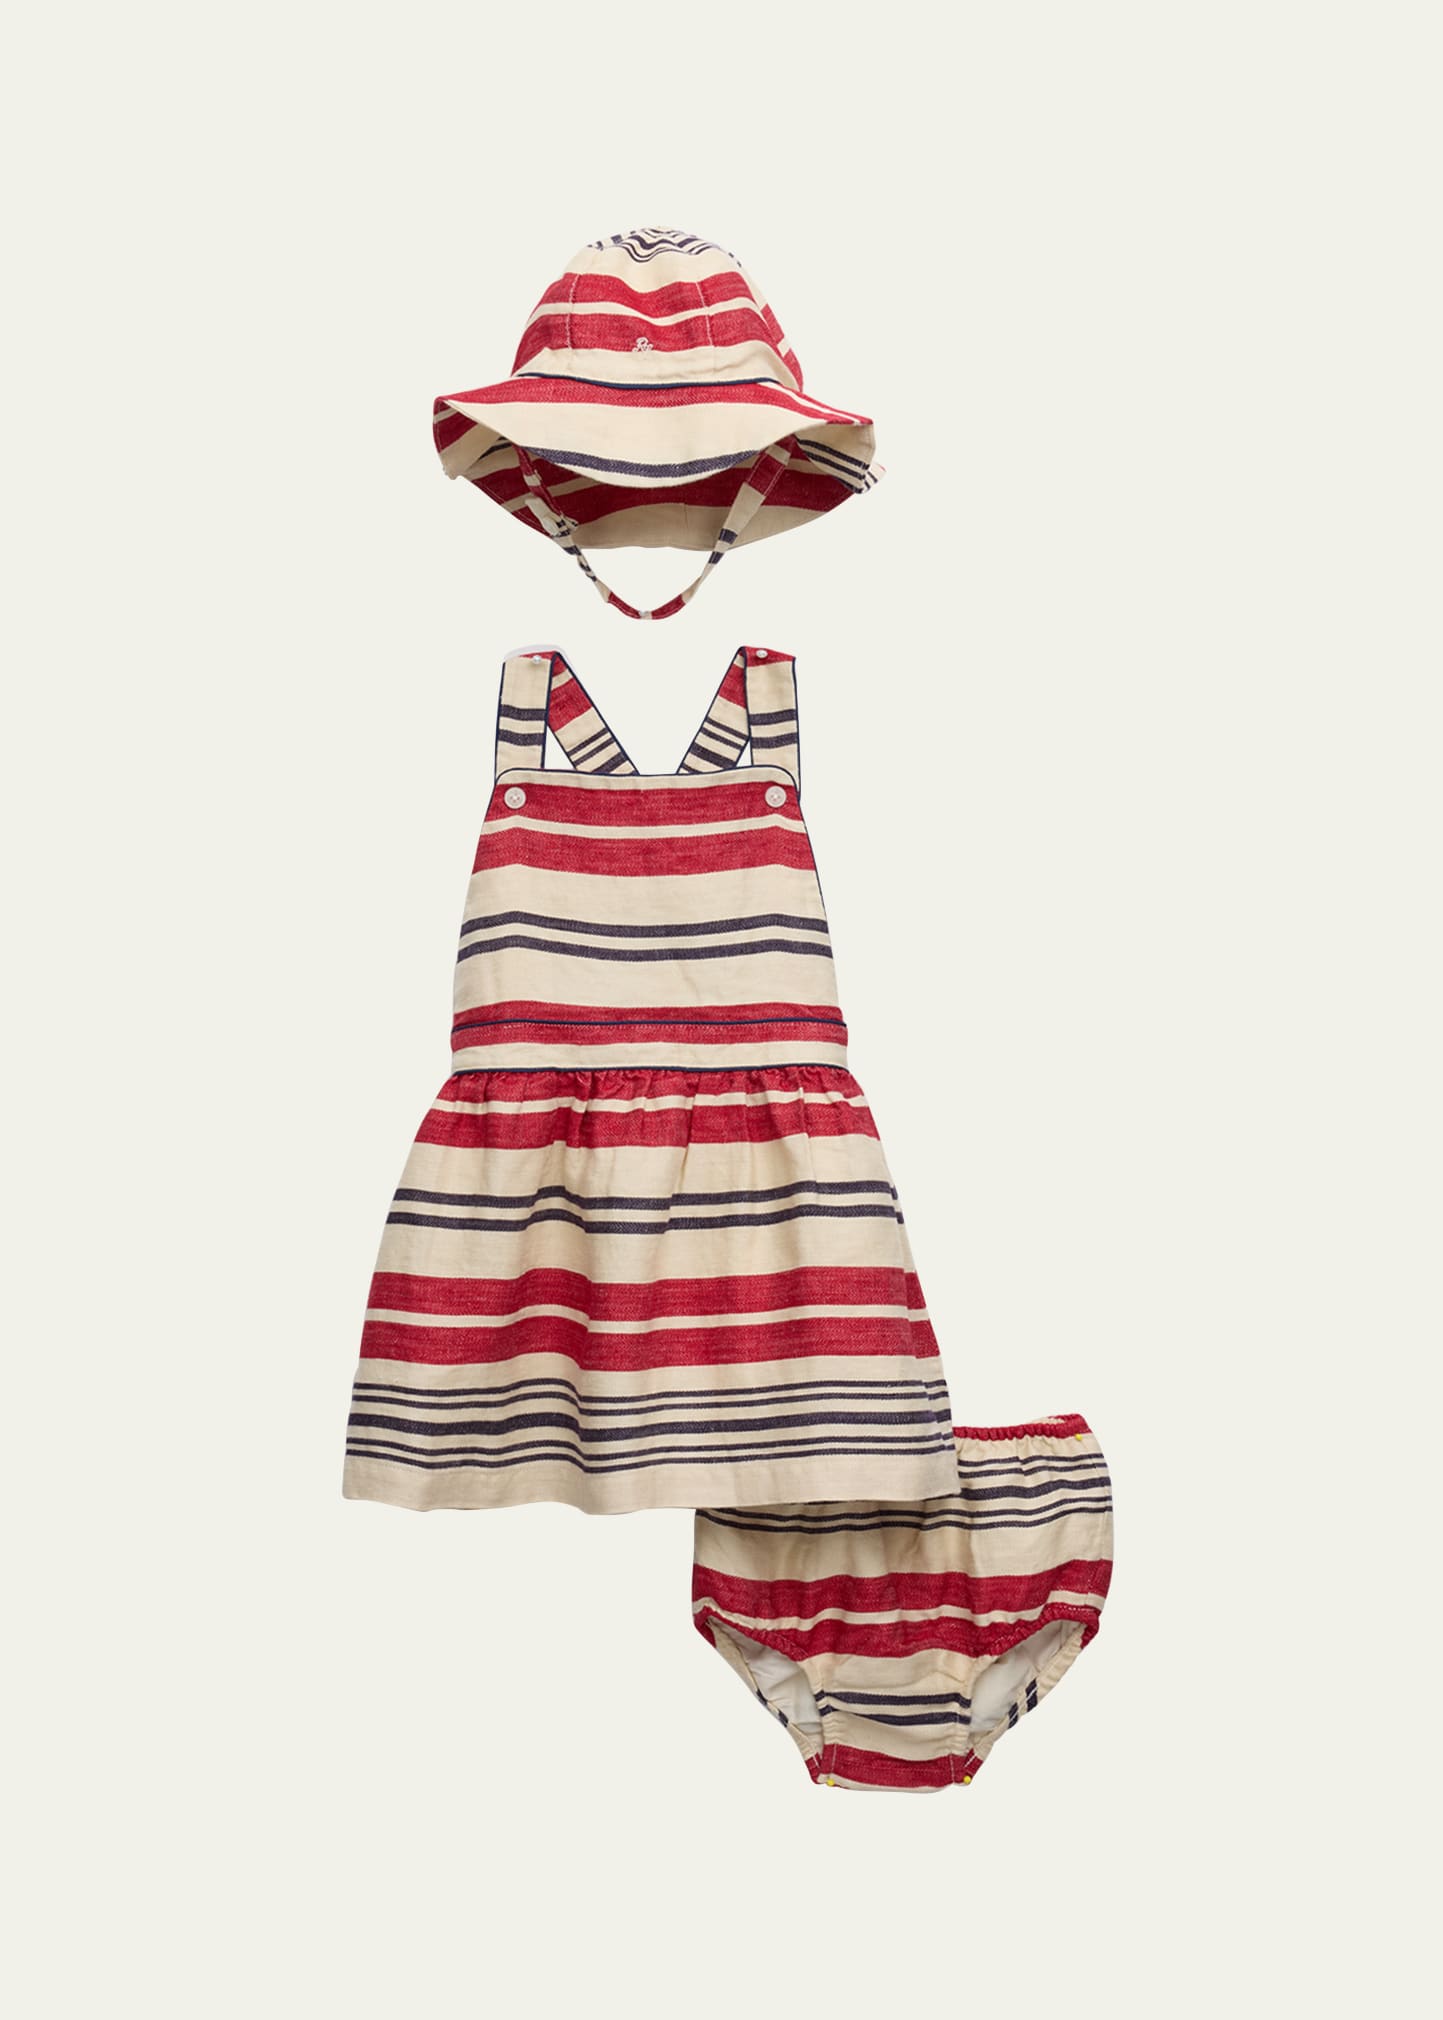 Ralph Lauren Kids' Girl's Striped Linen Dress, Hat And Bloomers Set In Ralph Red Multi